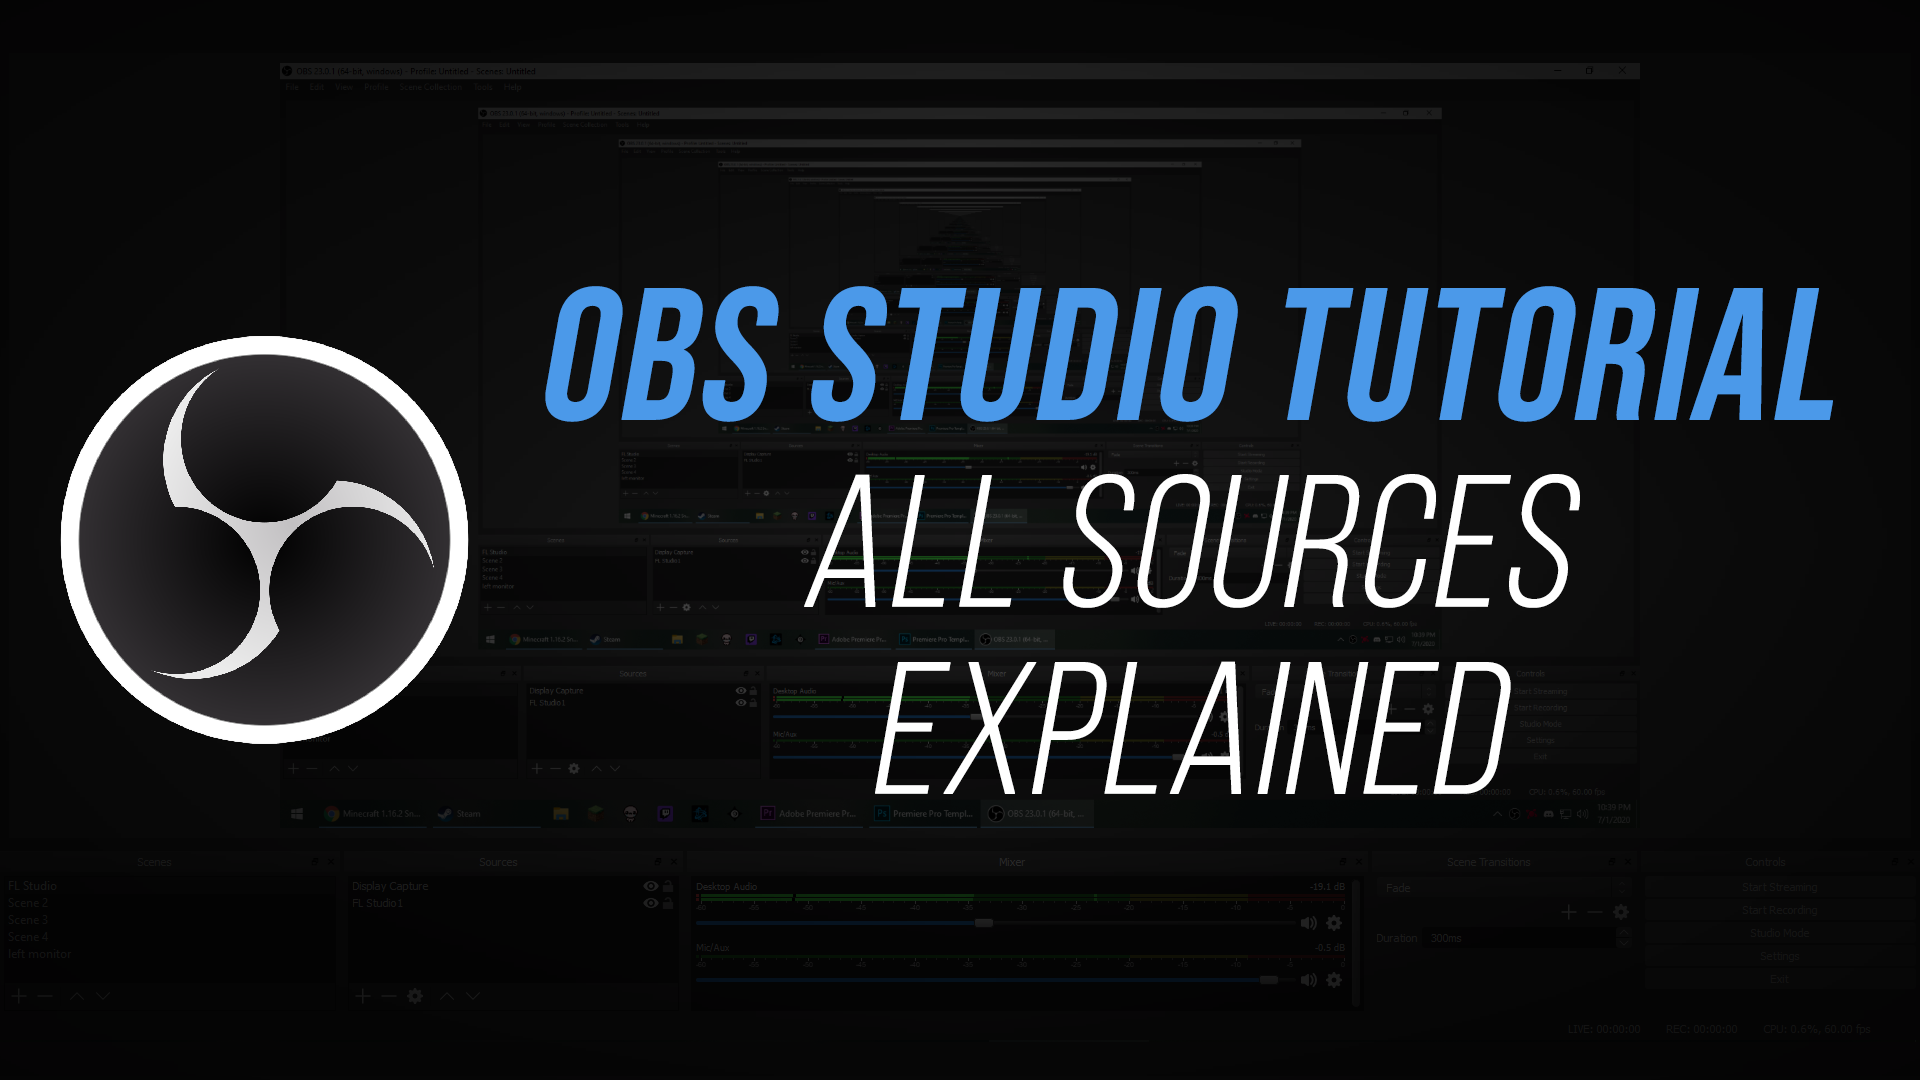 All Sources Explained in OBS Studio